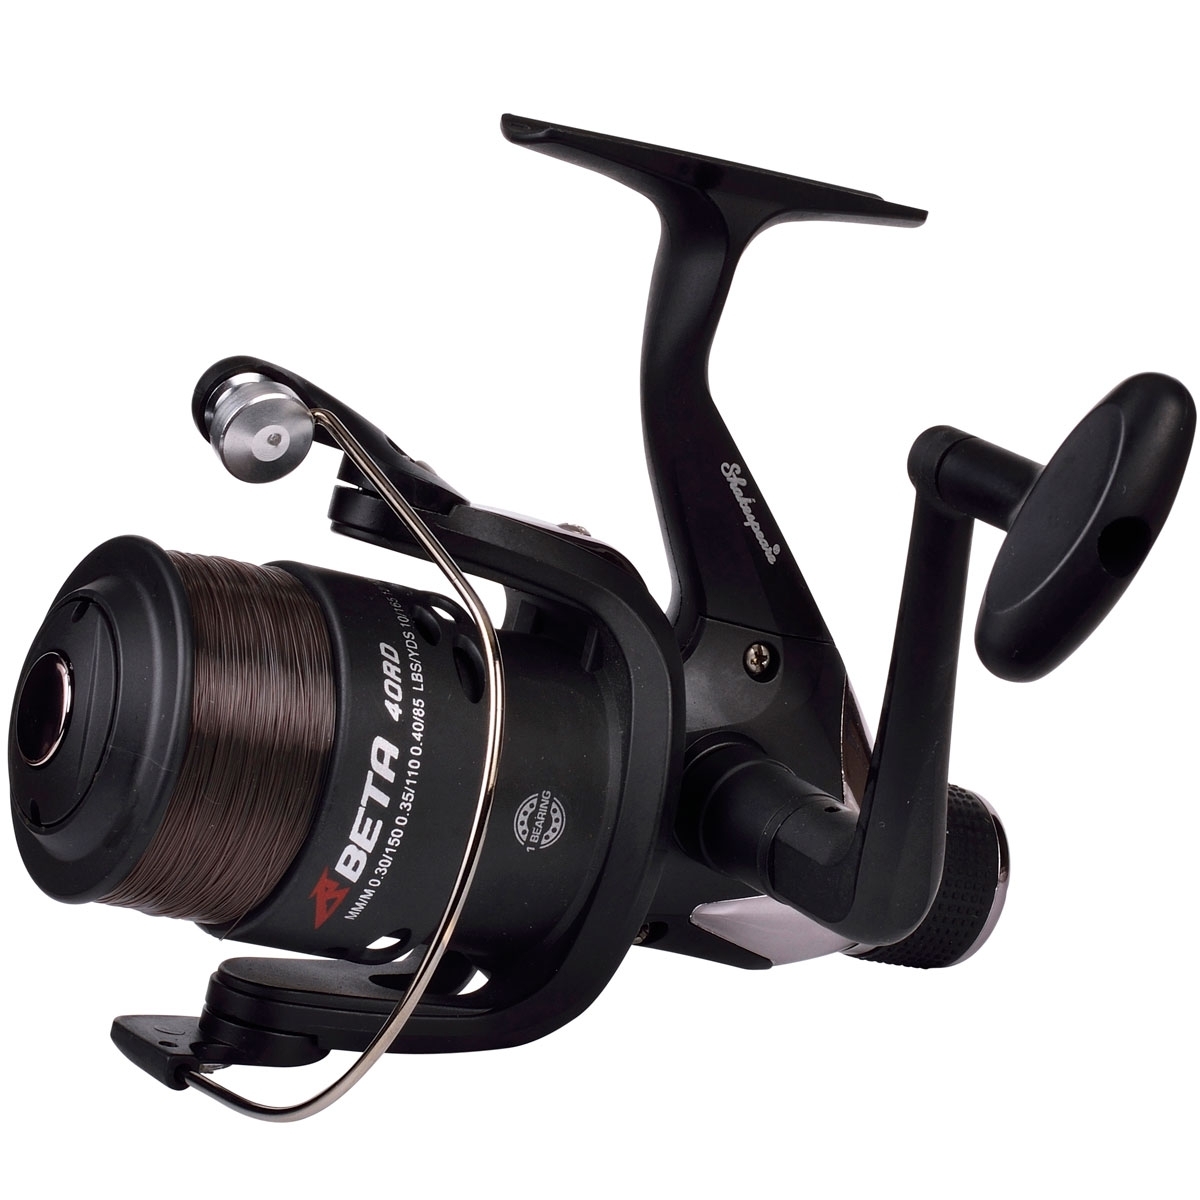 https://cdn.anglingactive.co.uk/media/catalog/product/cache/c7a5695839b539f20c8015776a05748c/s/h/shakespeare_beta_rd_reel_-_rear_drag_spinning_fixed_spool_reels.jpg